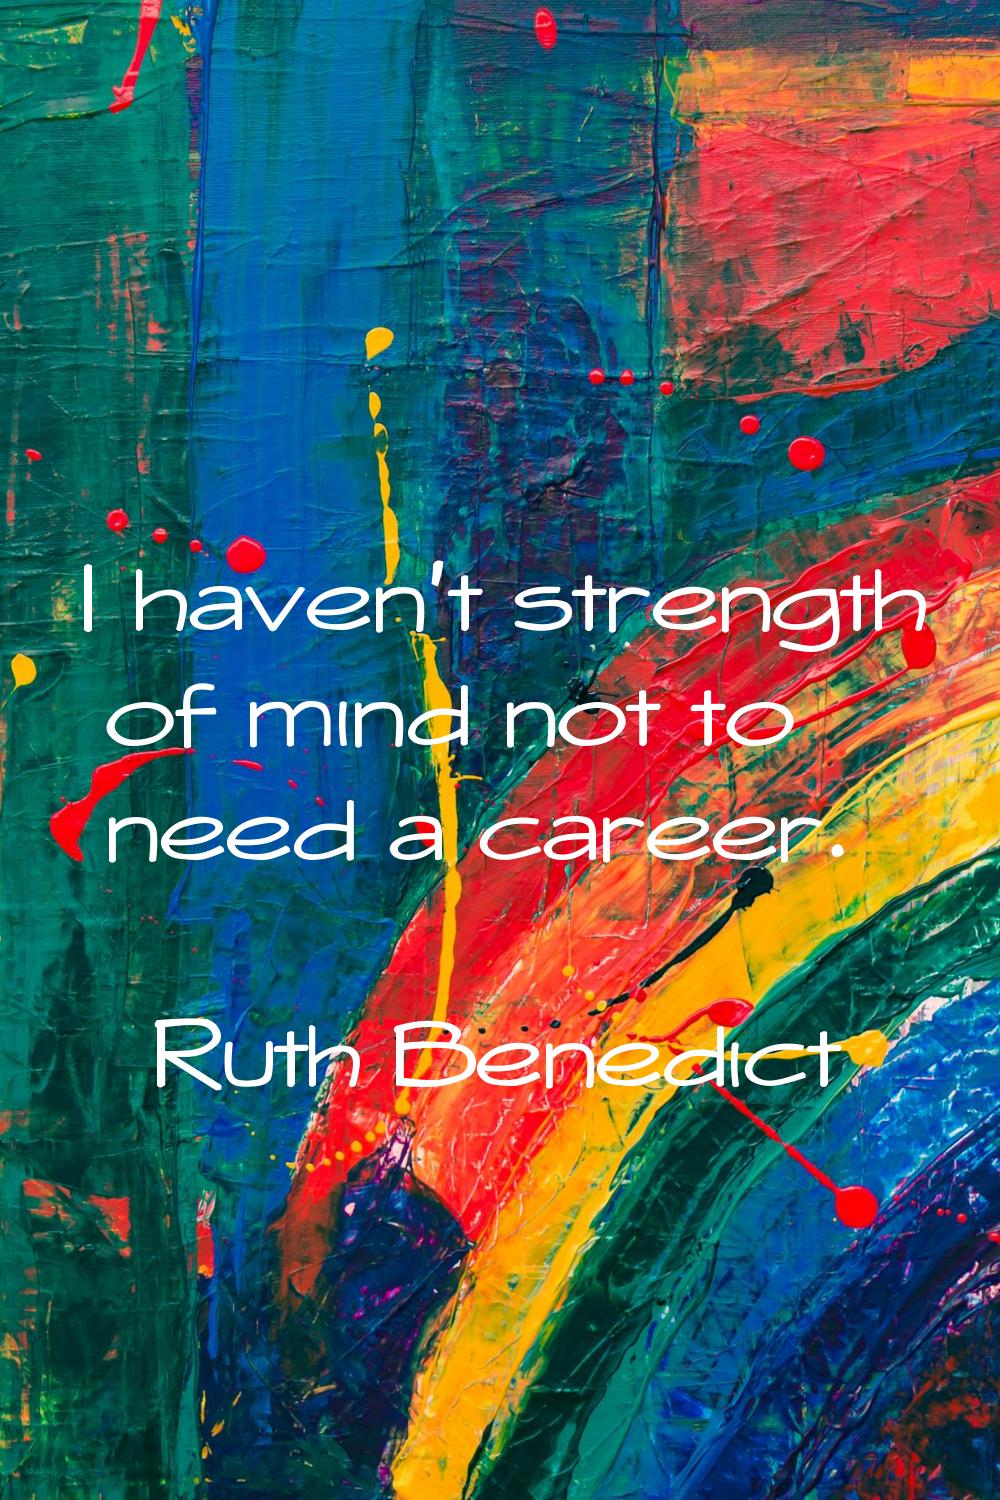 I haven't strength of mind not to need a career.